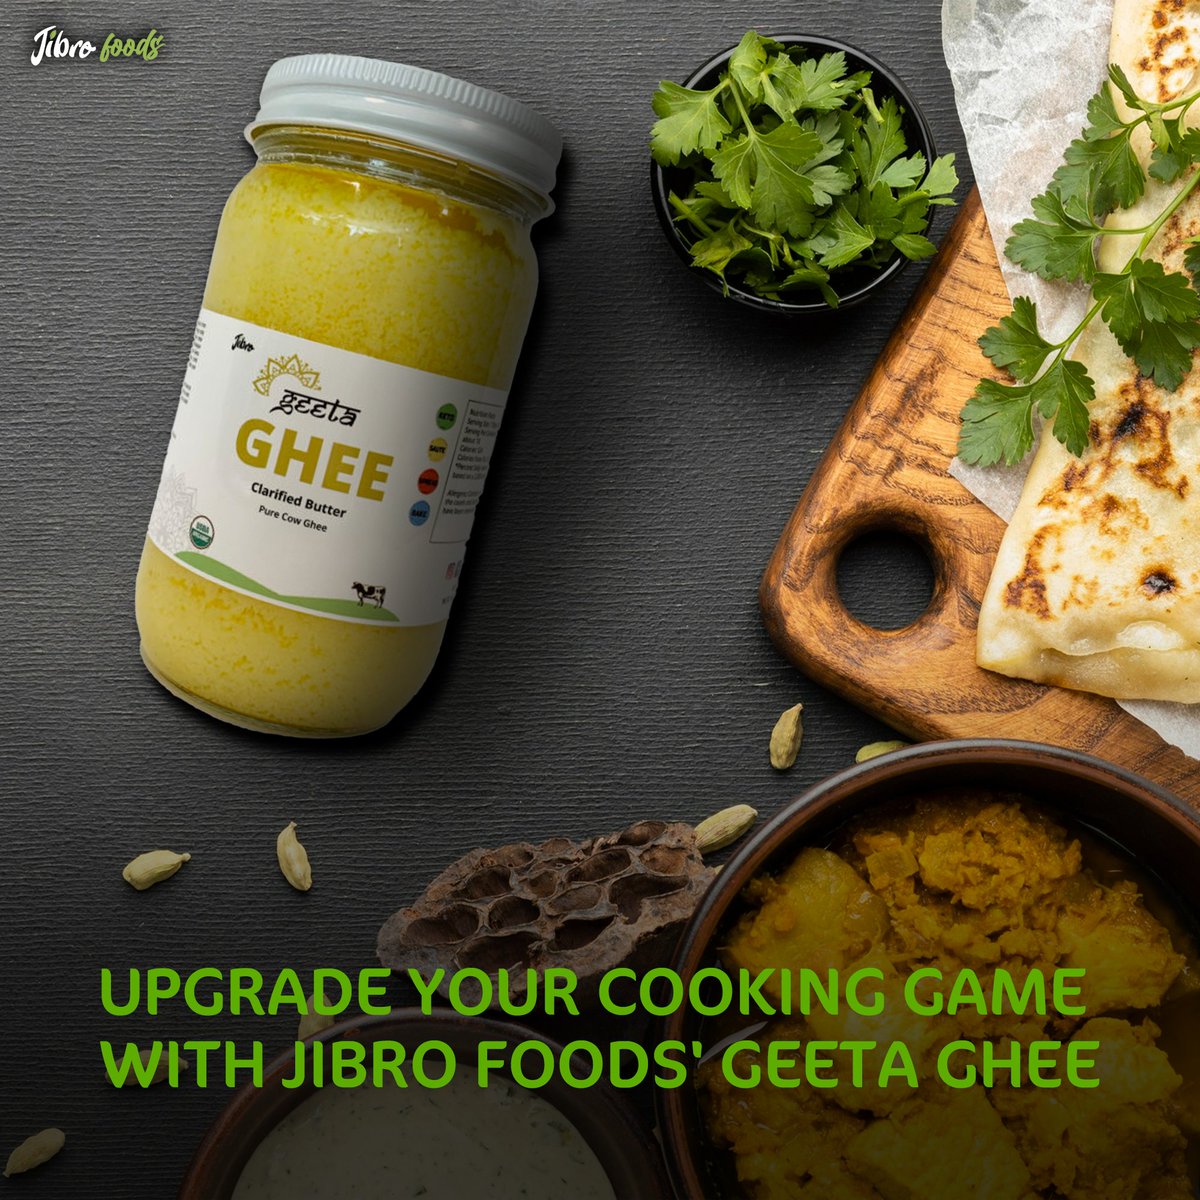 Indulge in the goodness of cultured organic ghee with Jibro Foods 🧡

From homemade parathas to delectable desserts, Jibro Foods' Geeta Ghee adds a distinct richness to your meals. Buy it online now!

#jibrofoods #geetaghee #ghee #gheebutter #gheebenefits #organicghee #cowghee